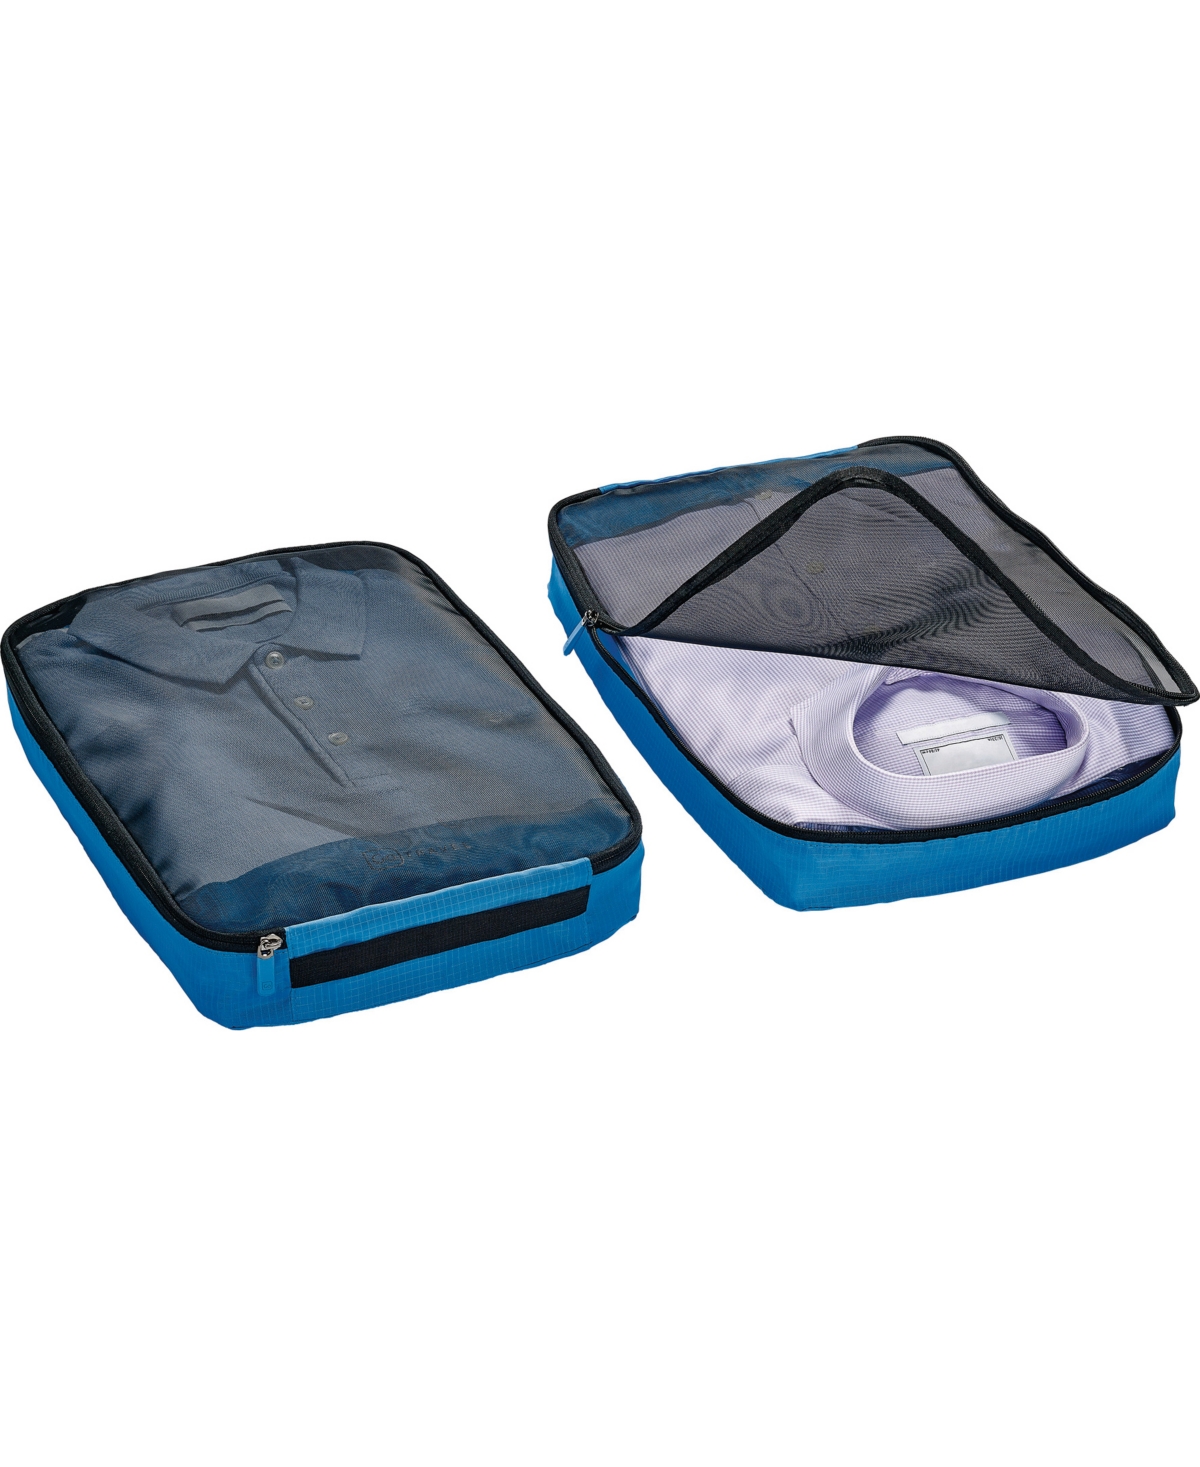 2-Pc. Packing Cube Set - Blue